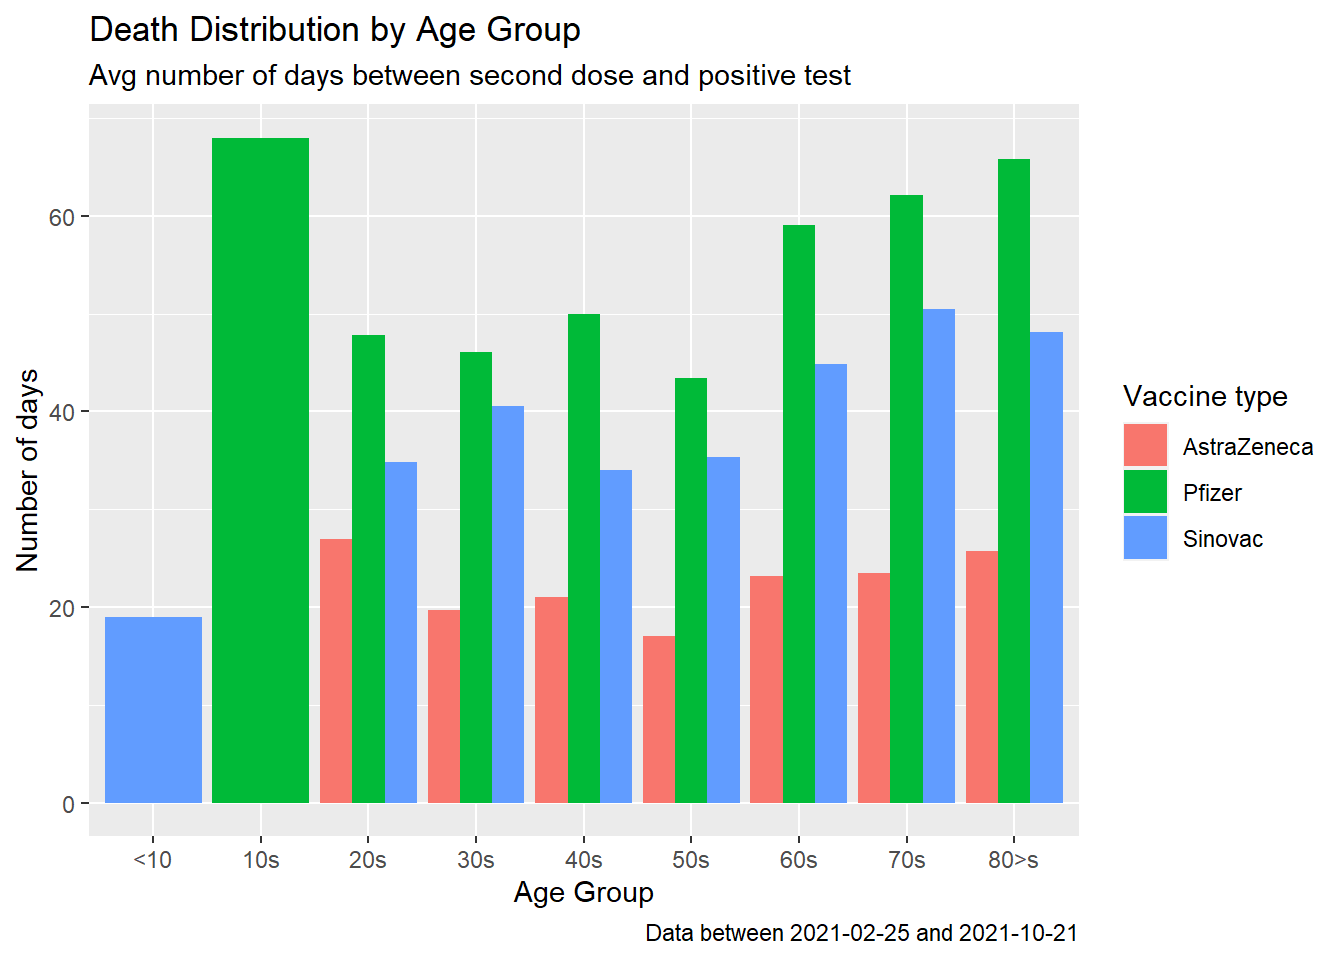 Covid deaths by age group